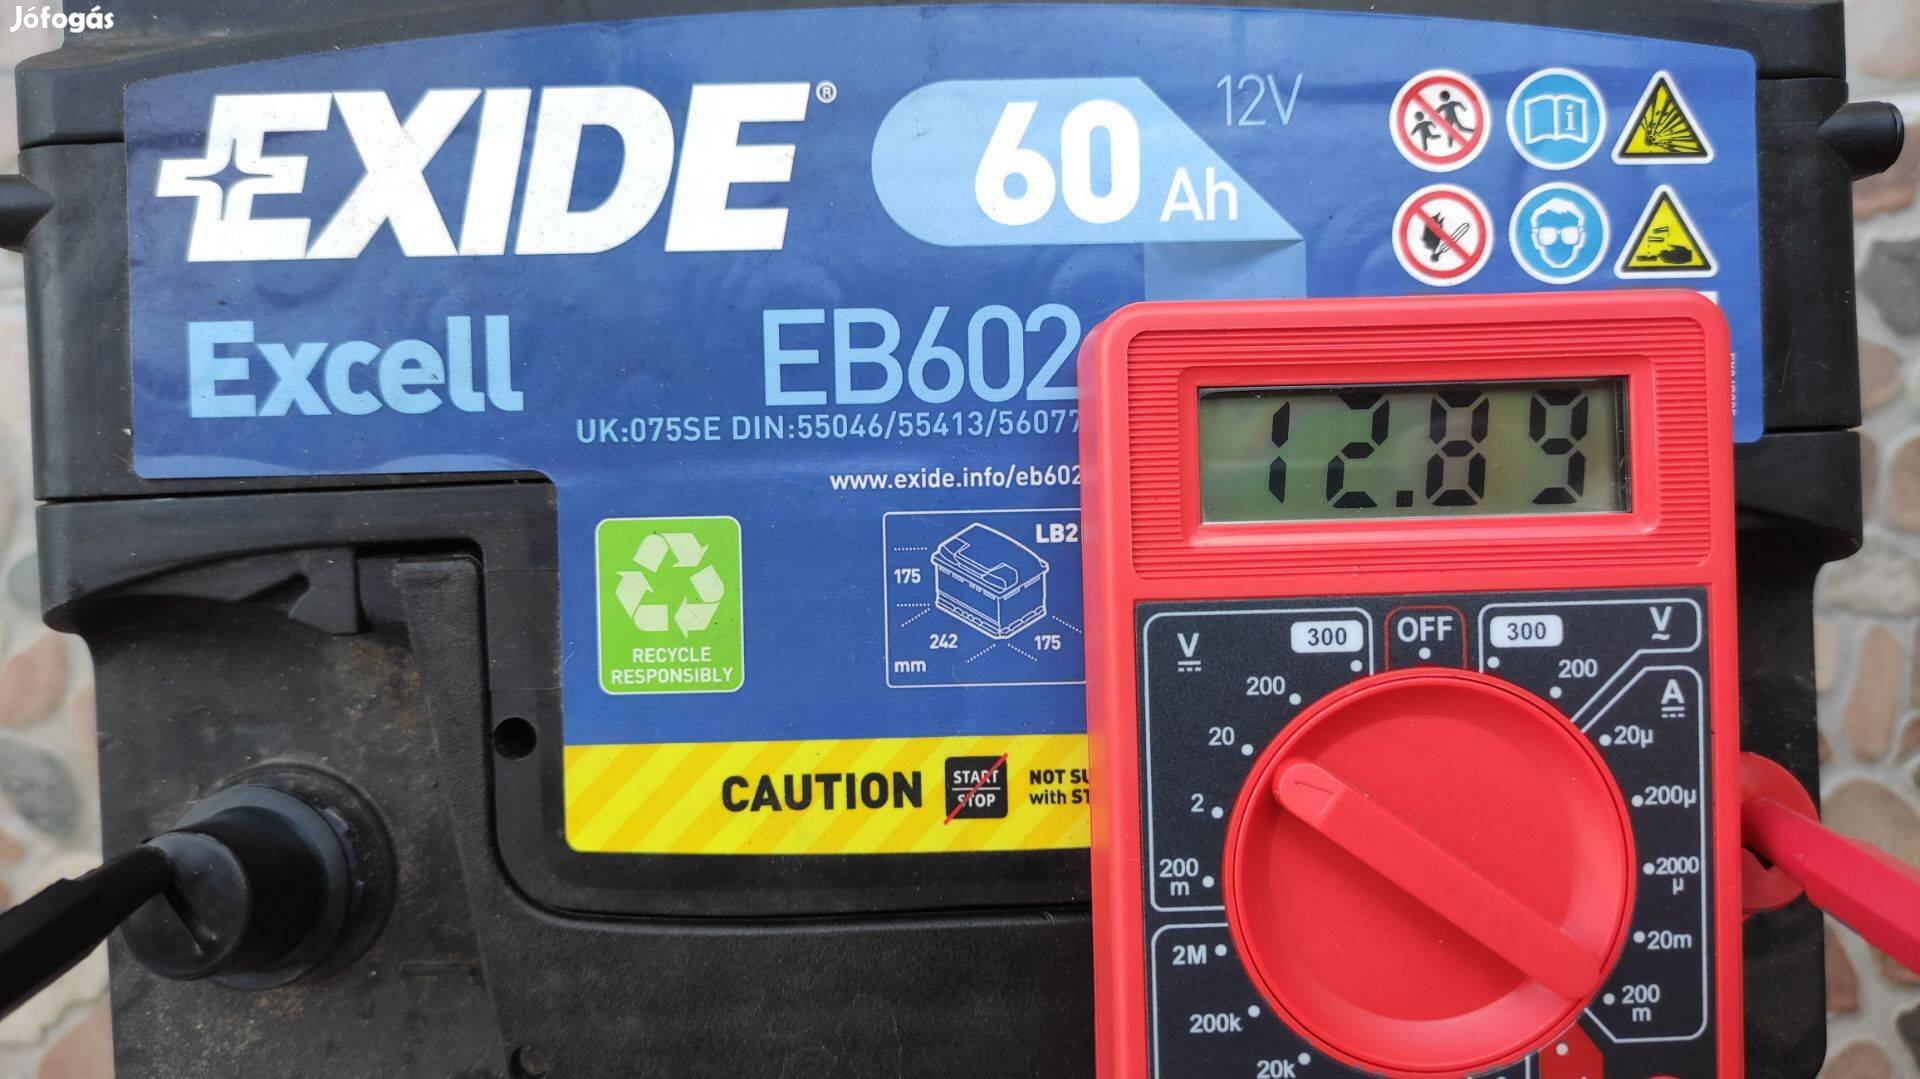 Exide Excell EB602